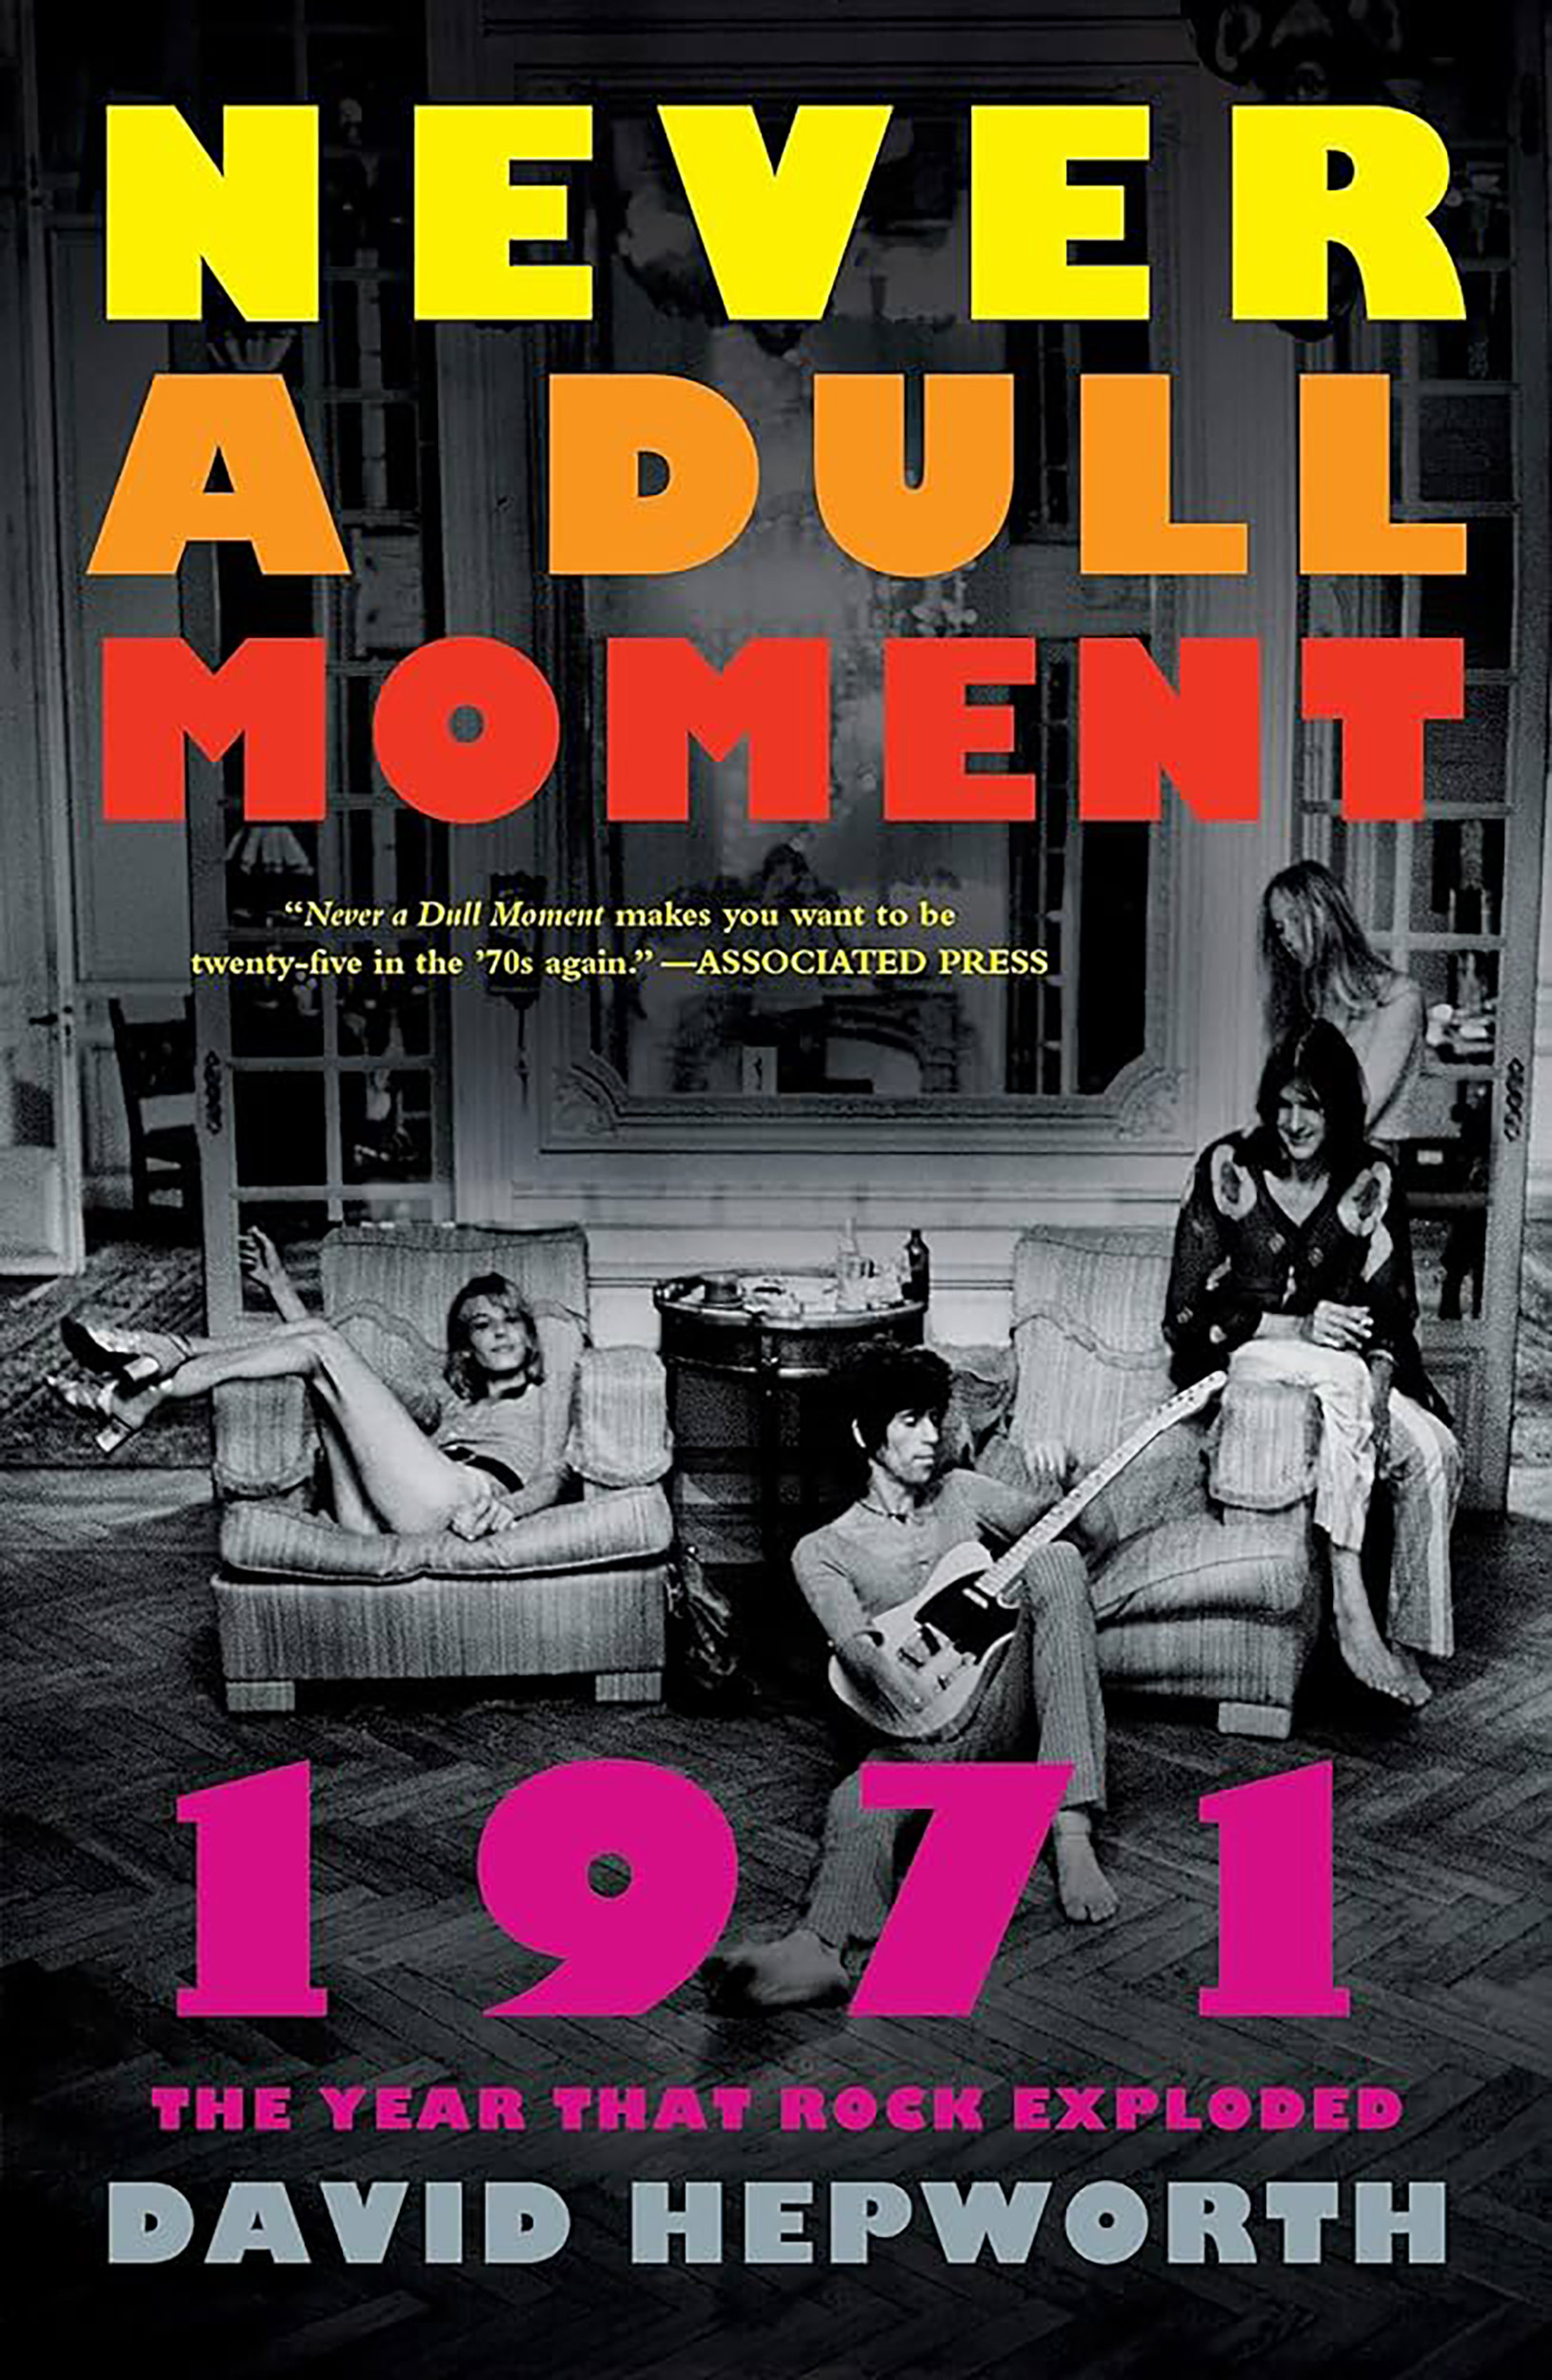 Book cover: "Never a Dull Moment."